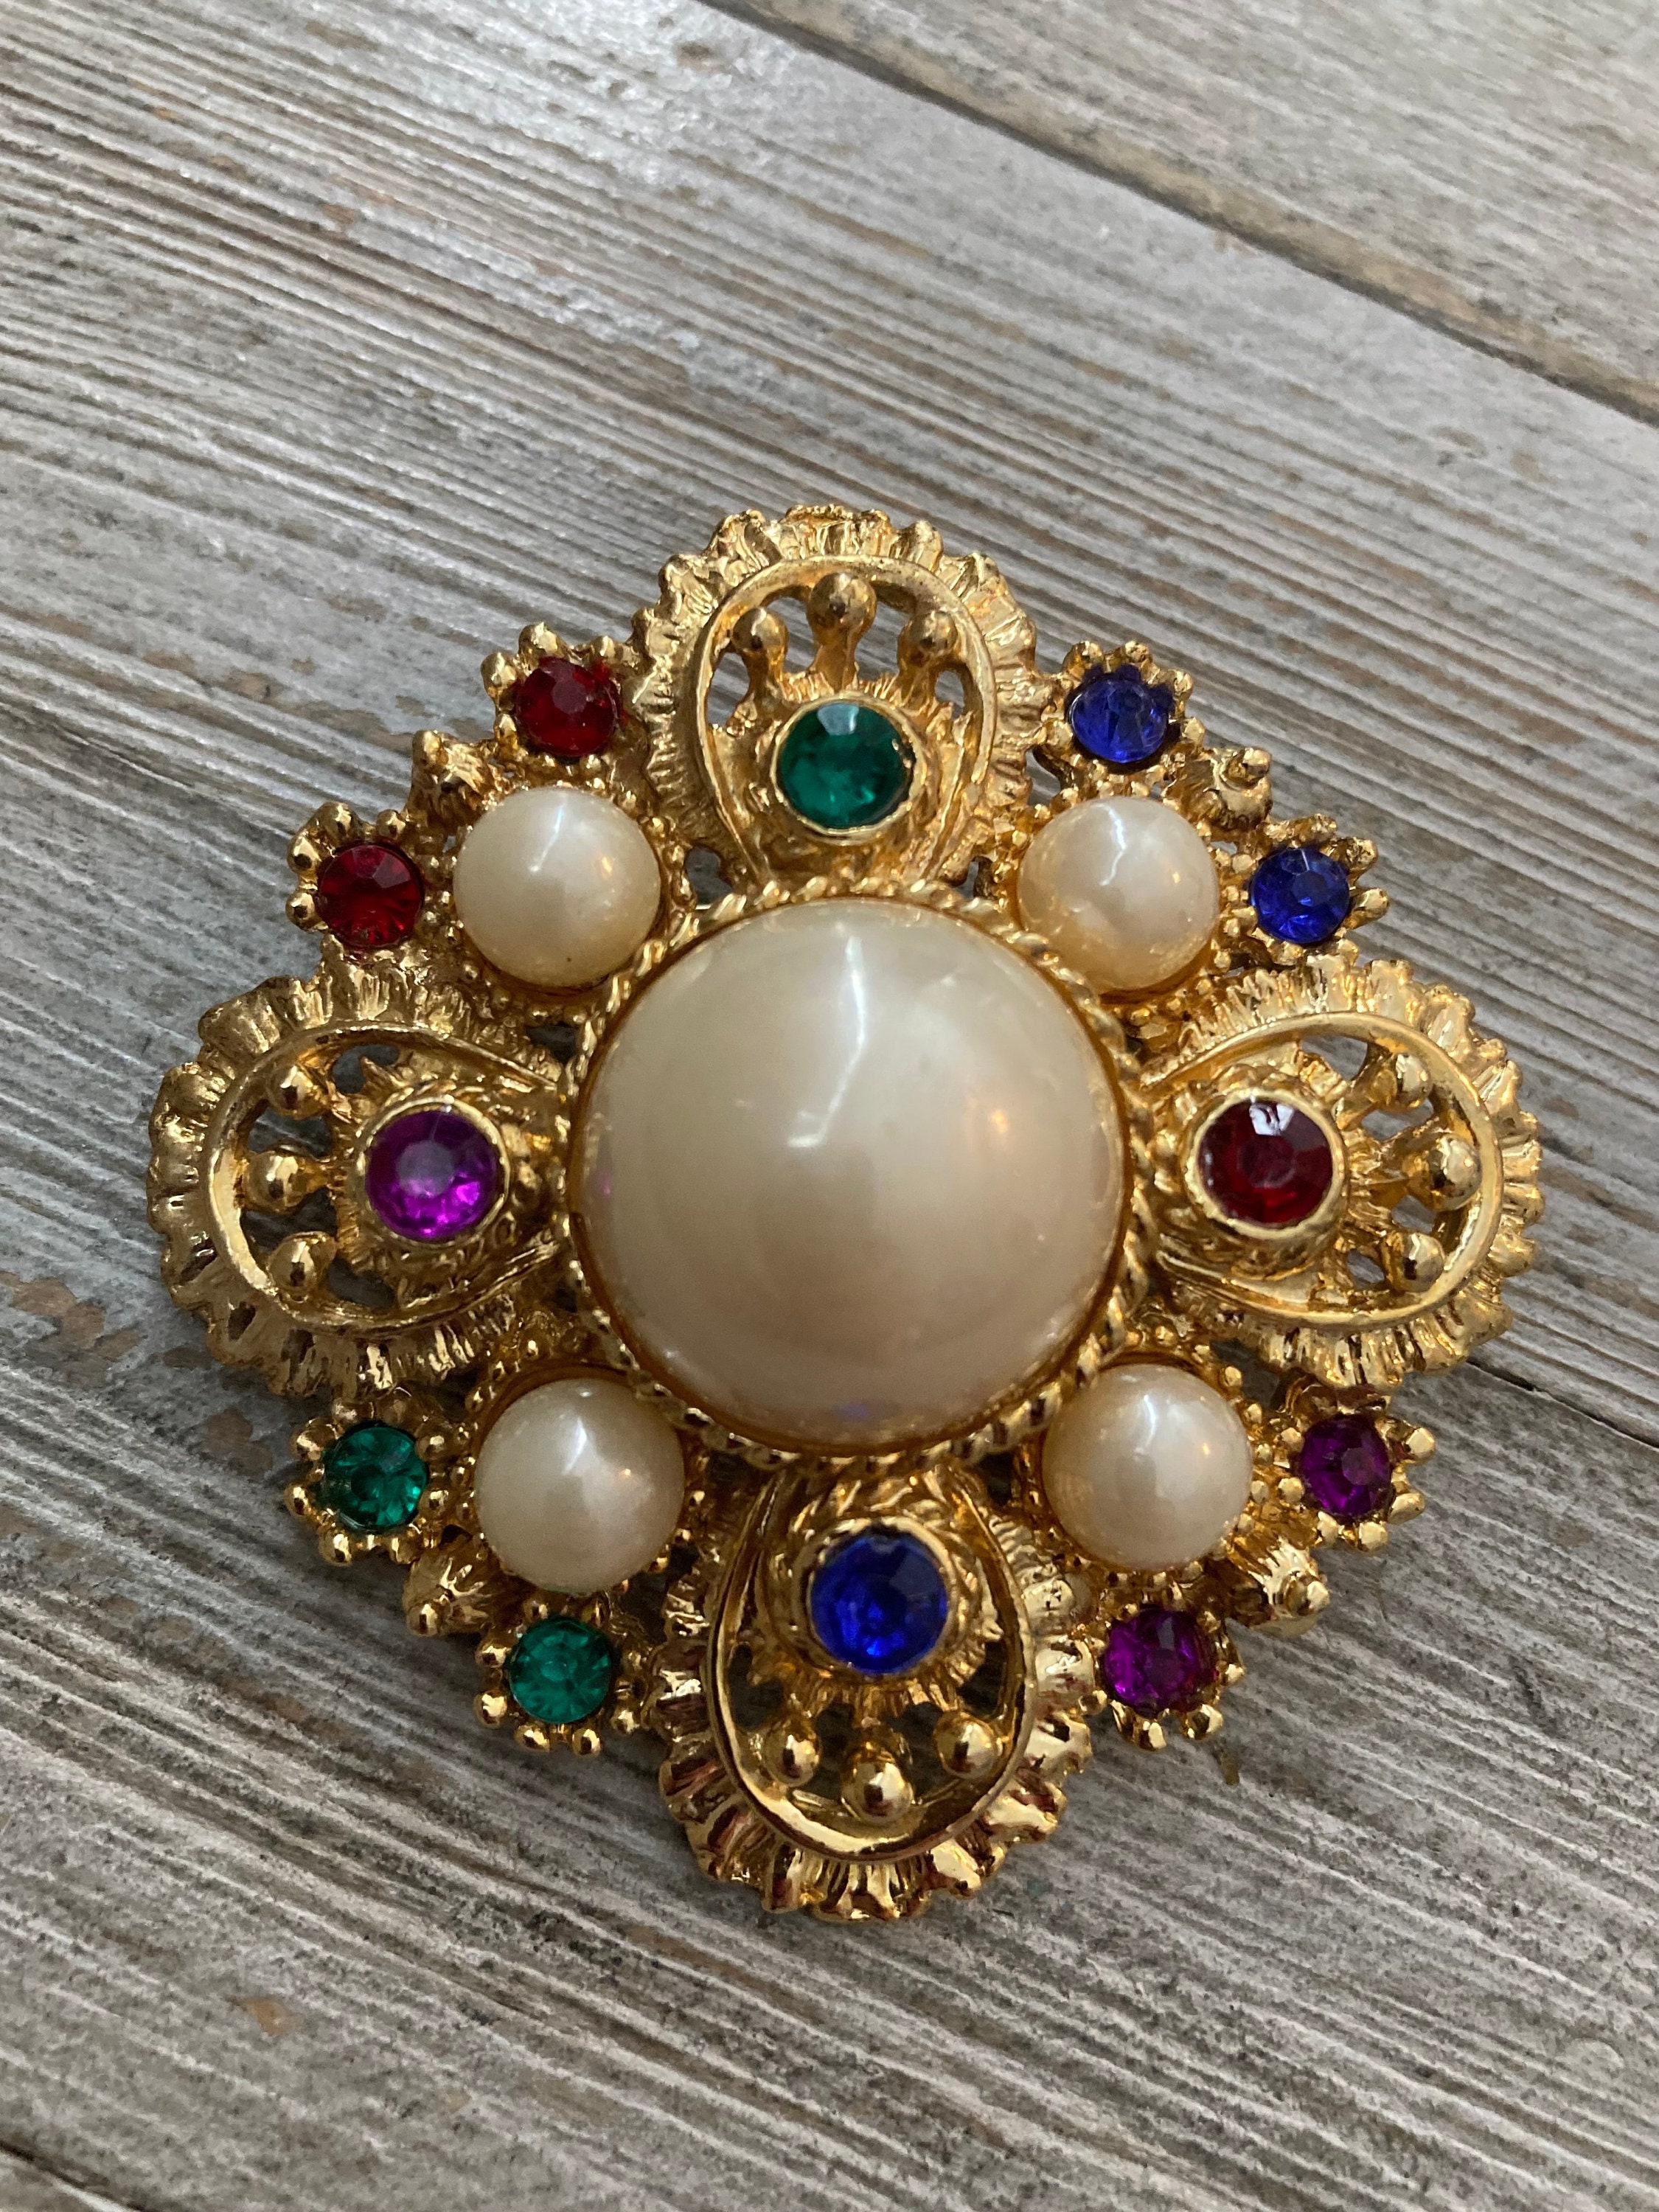 SandysvintagBoutique Gorgeous Vintage 1990's Gold with Multicolored Rhinestones and Faux Pearls Classic Maltese Cross Statement Brooch